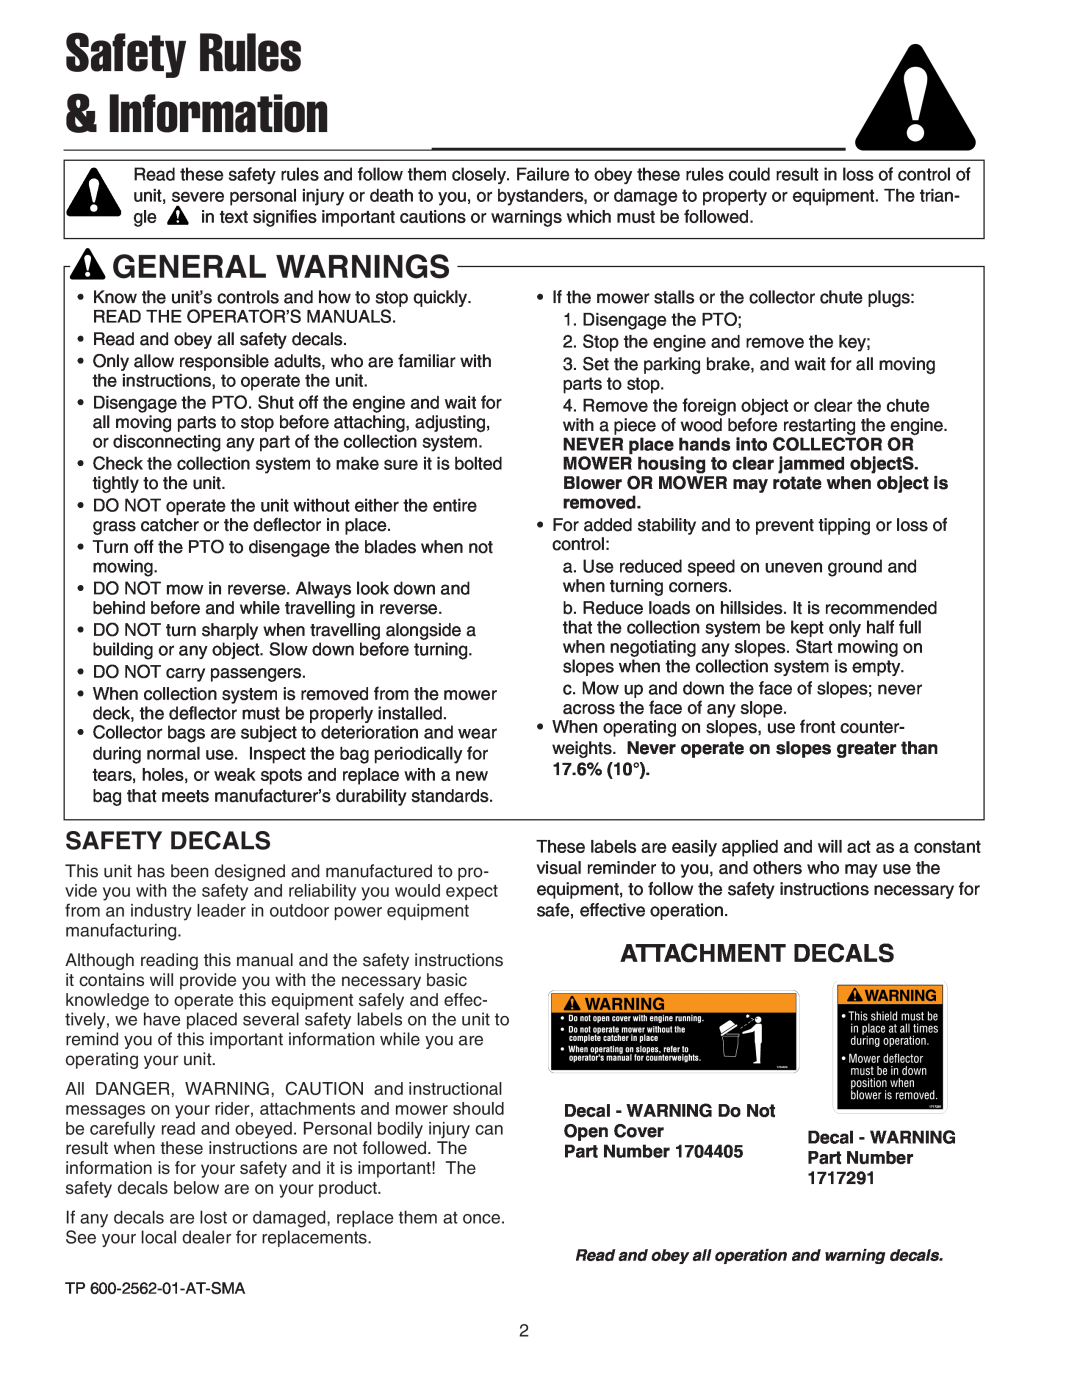 Snapper Clean Sweep Twin Catcher manual Safety Rules Information, Safety Decals, Attachment Decals, General Warnings 